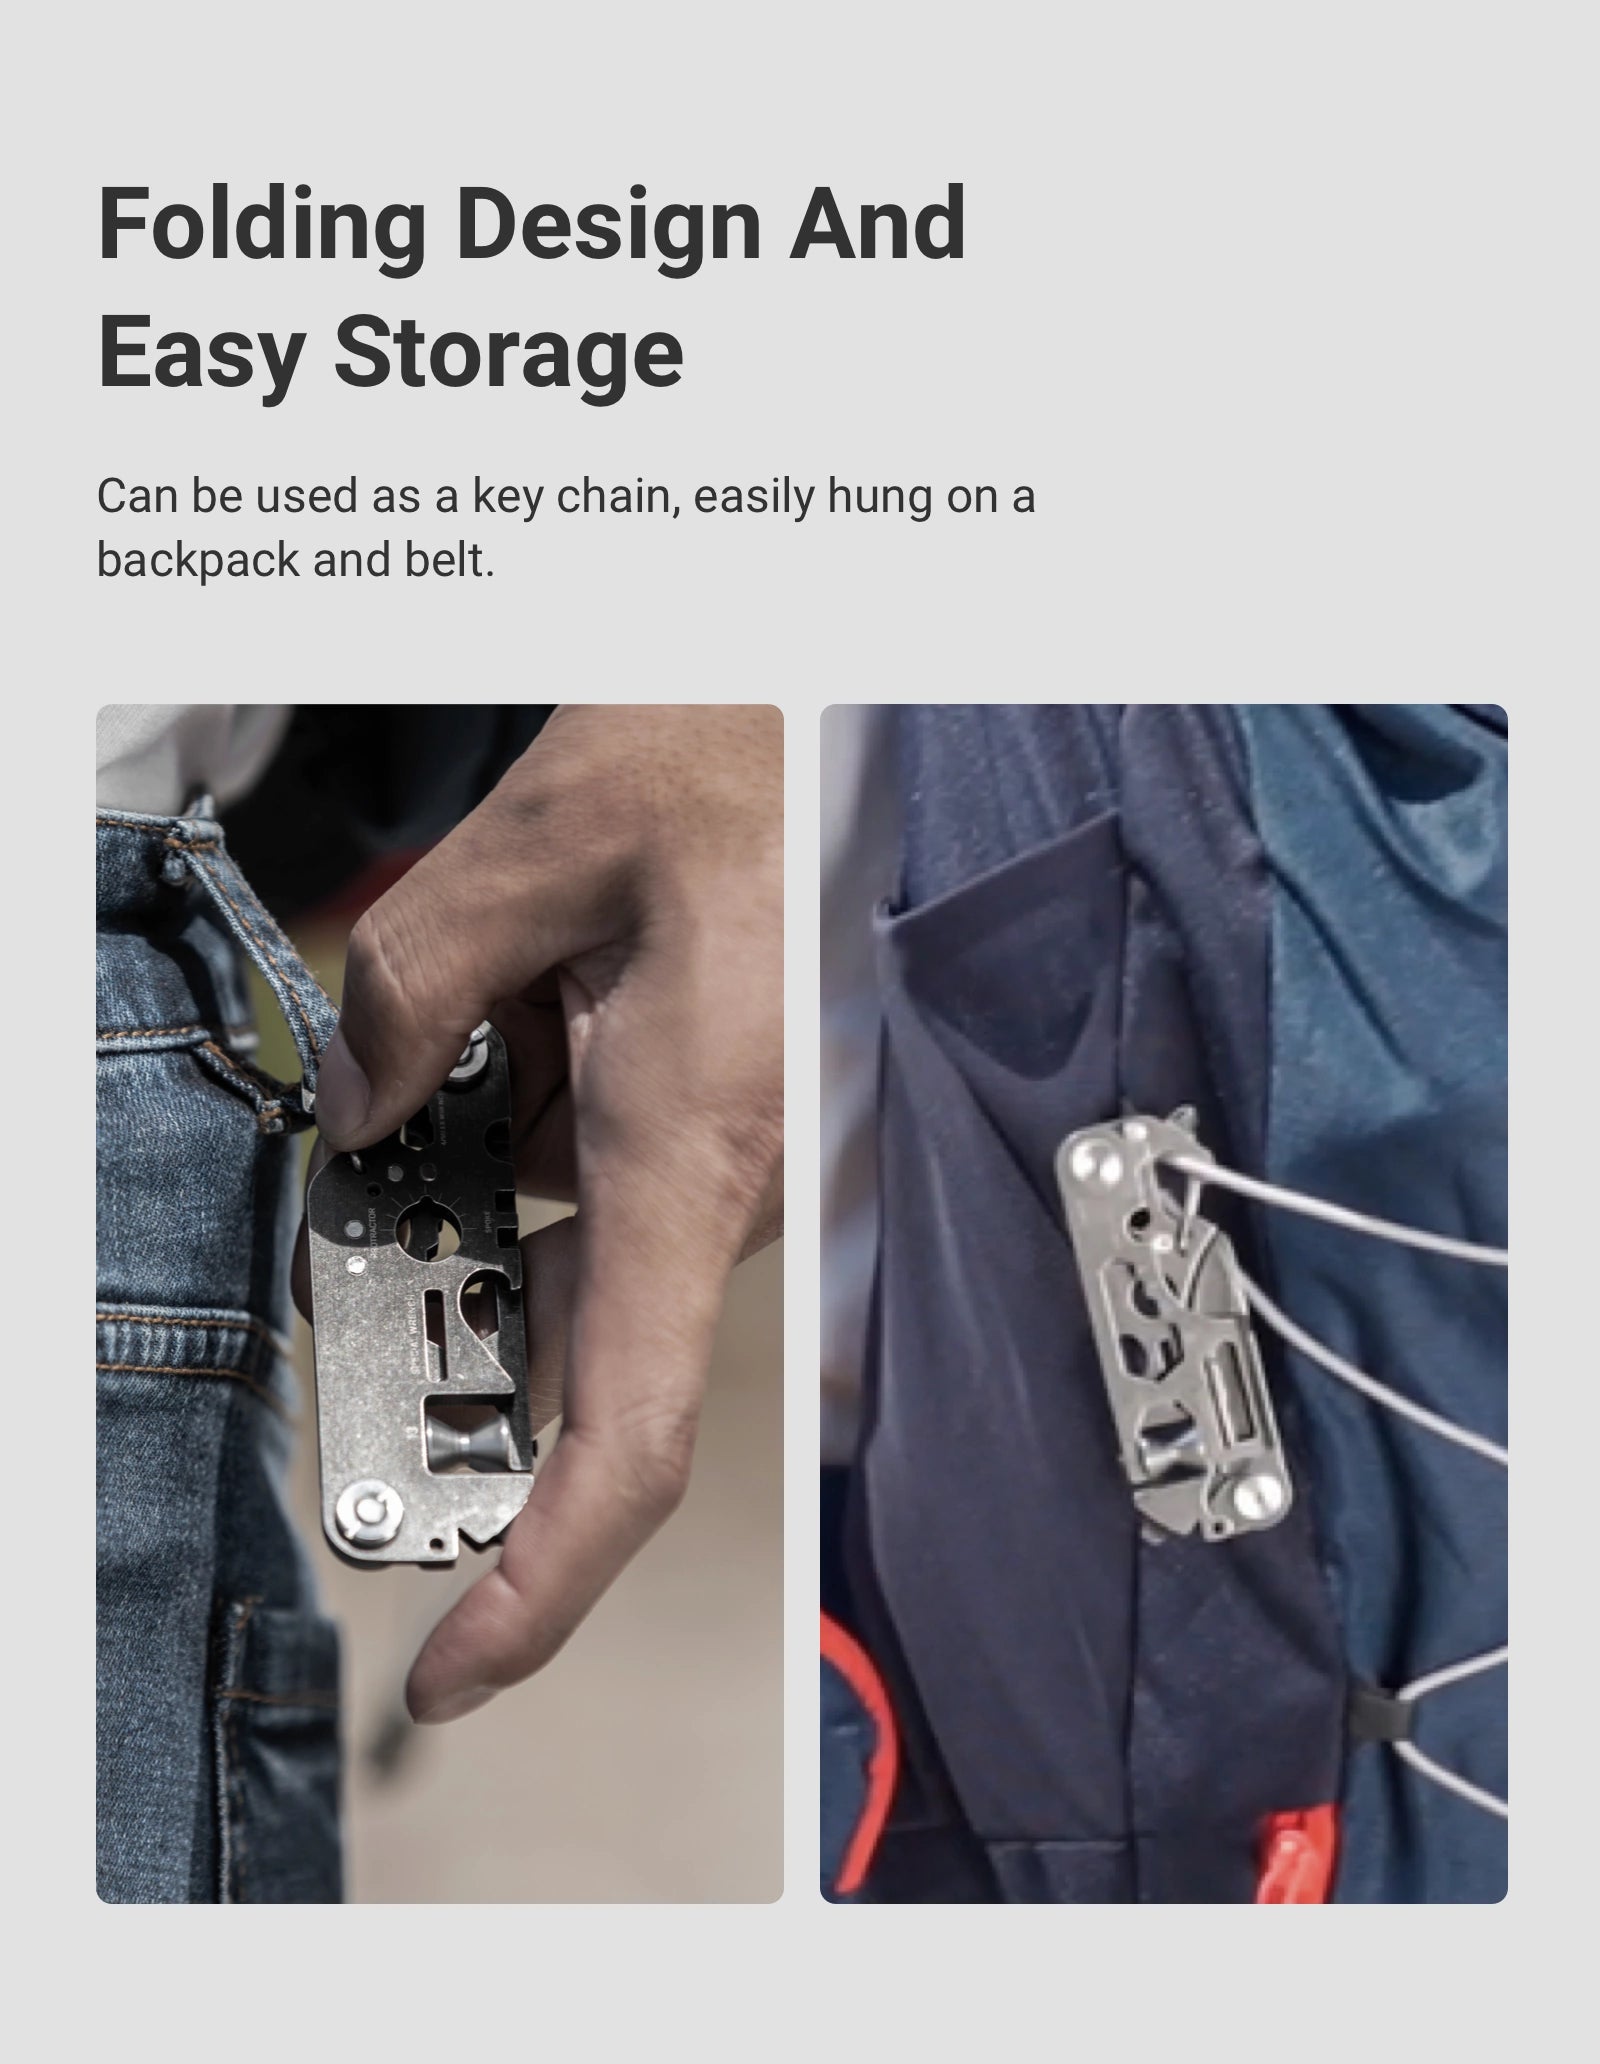 Folding Design And Easy Storage Can be used as a key chain, easily hung on a backpack and belt.